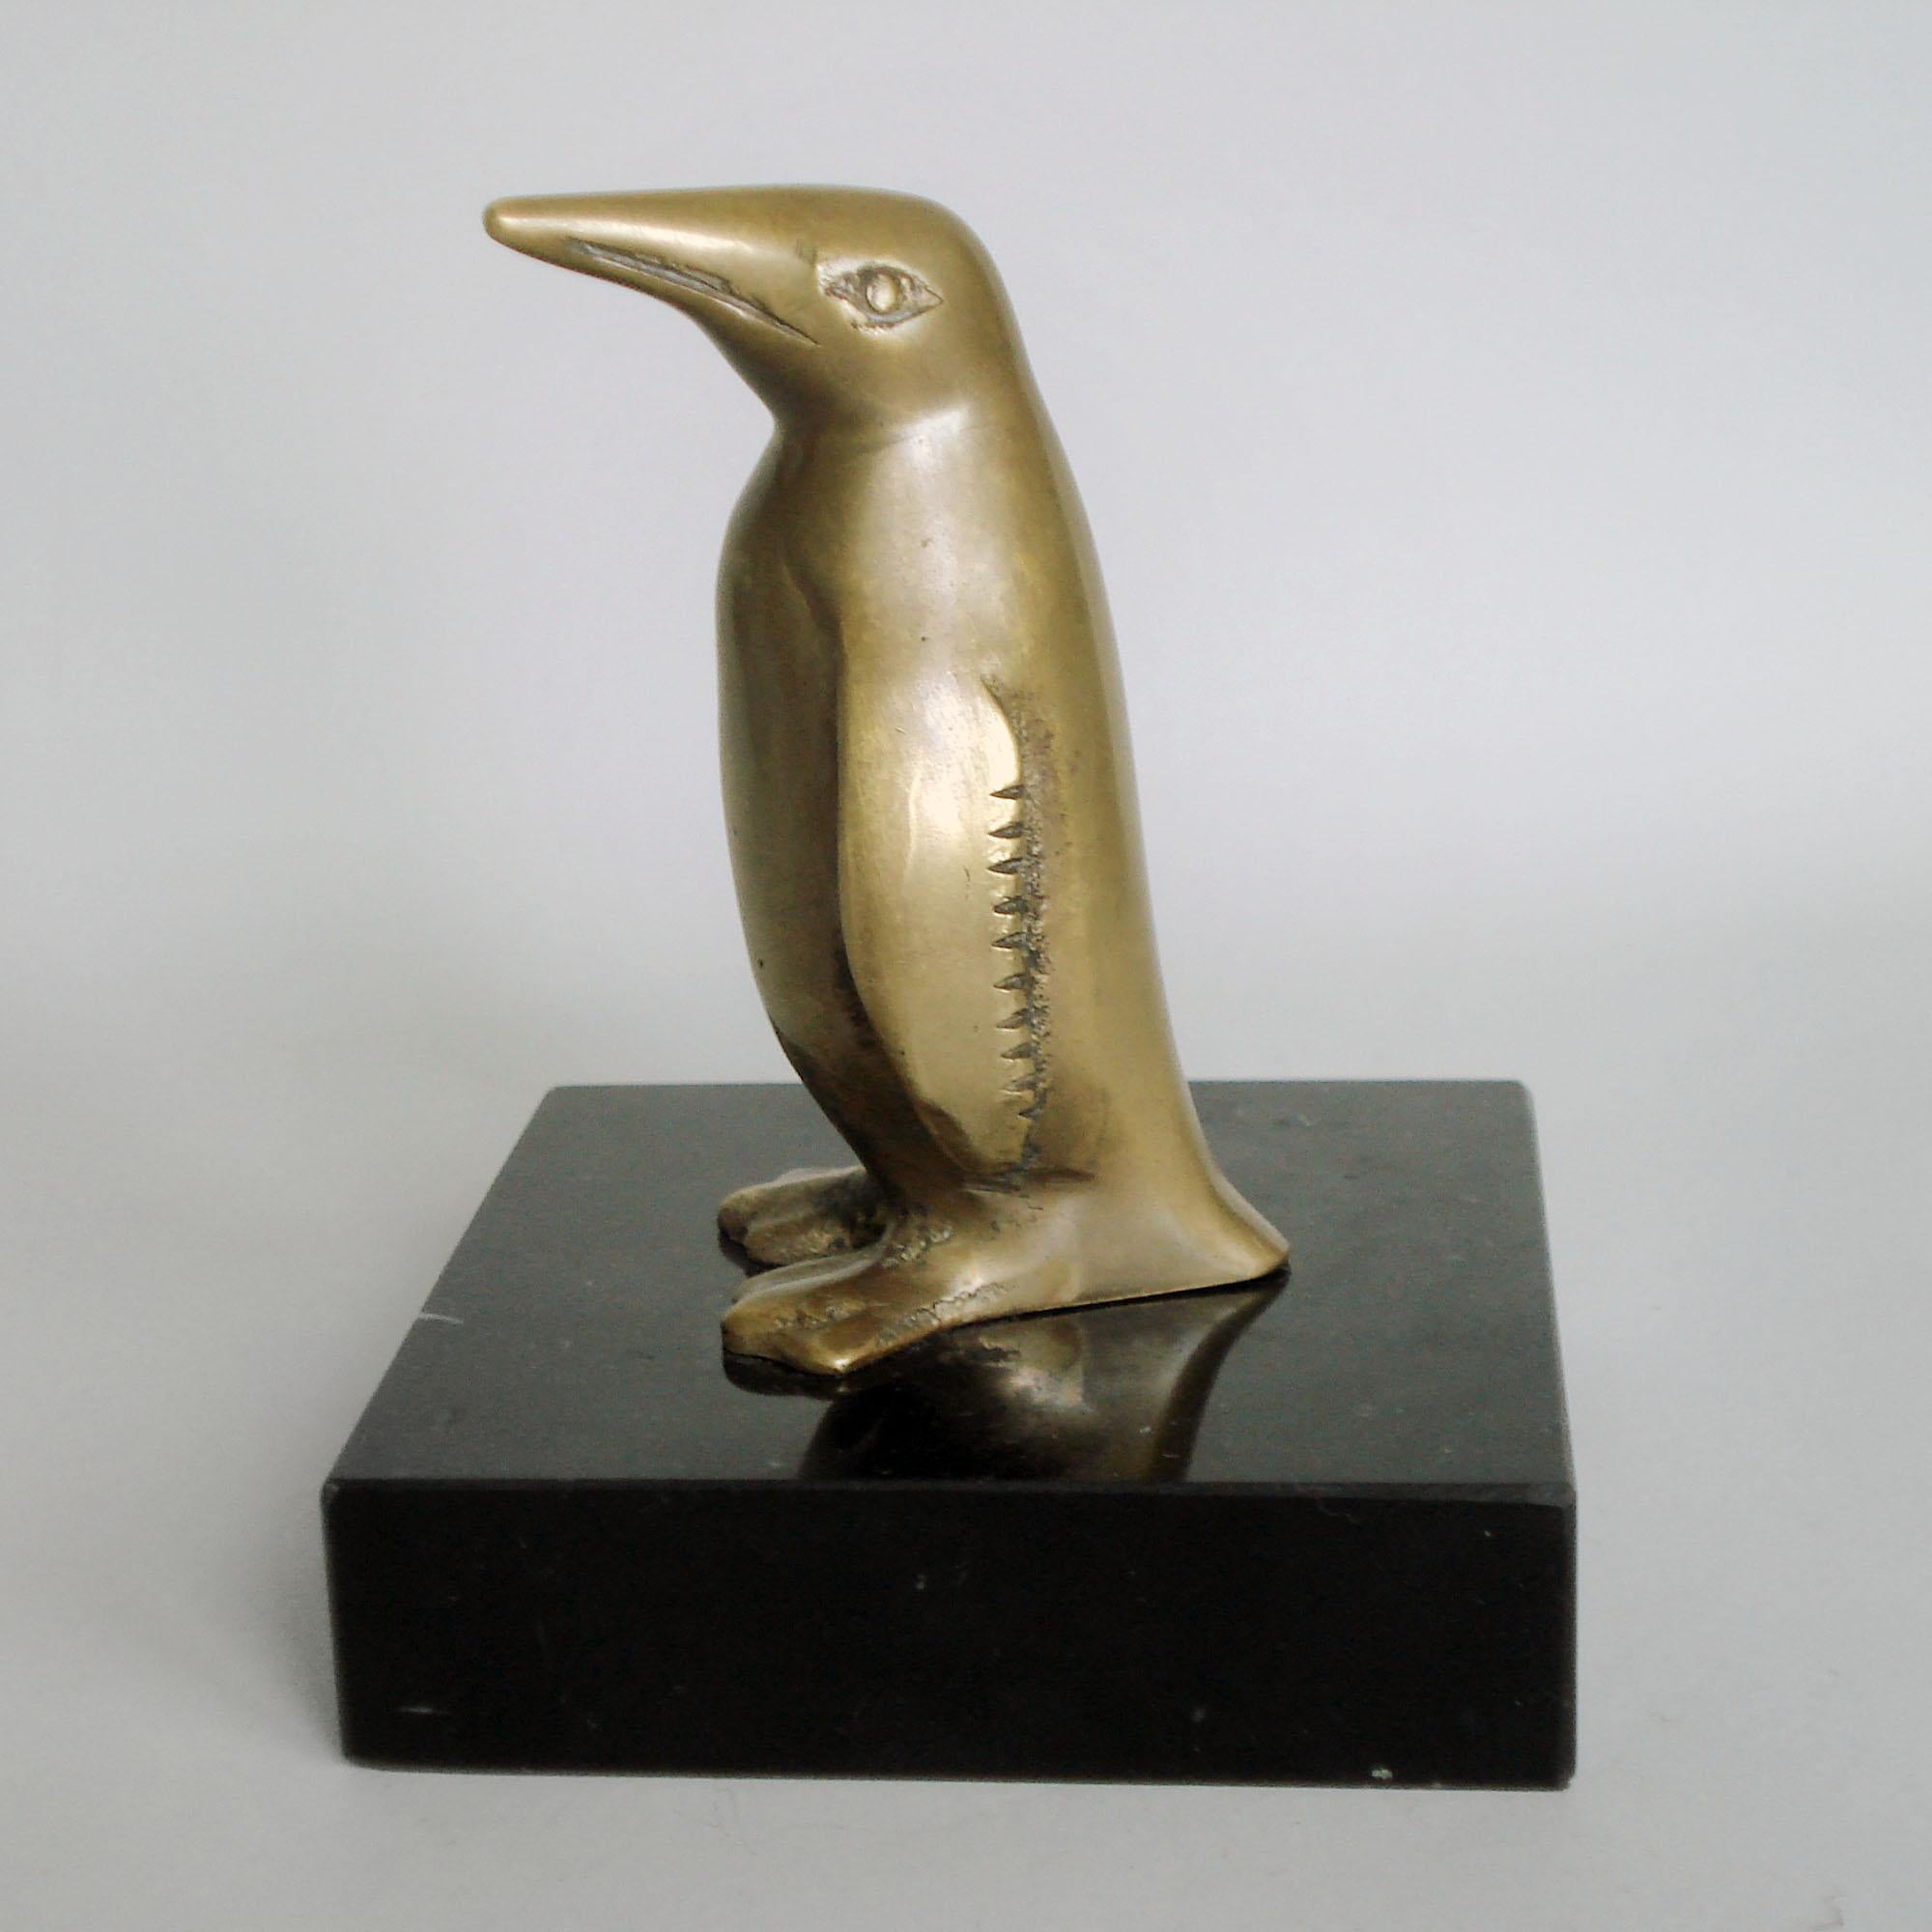 Beautiful Art Deco bronze figurine depicting a Penguin on a black marble base, designed by Jan Johannes Bosma (1879-1960), The Netherlands, circa 1925.
Good original condition, some wear of time, few scratches to the bronze, some chips to the